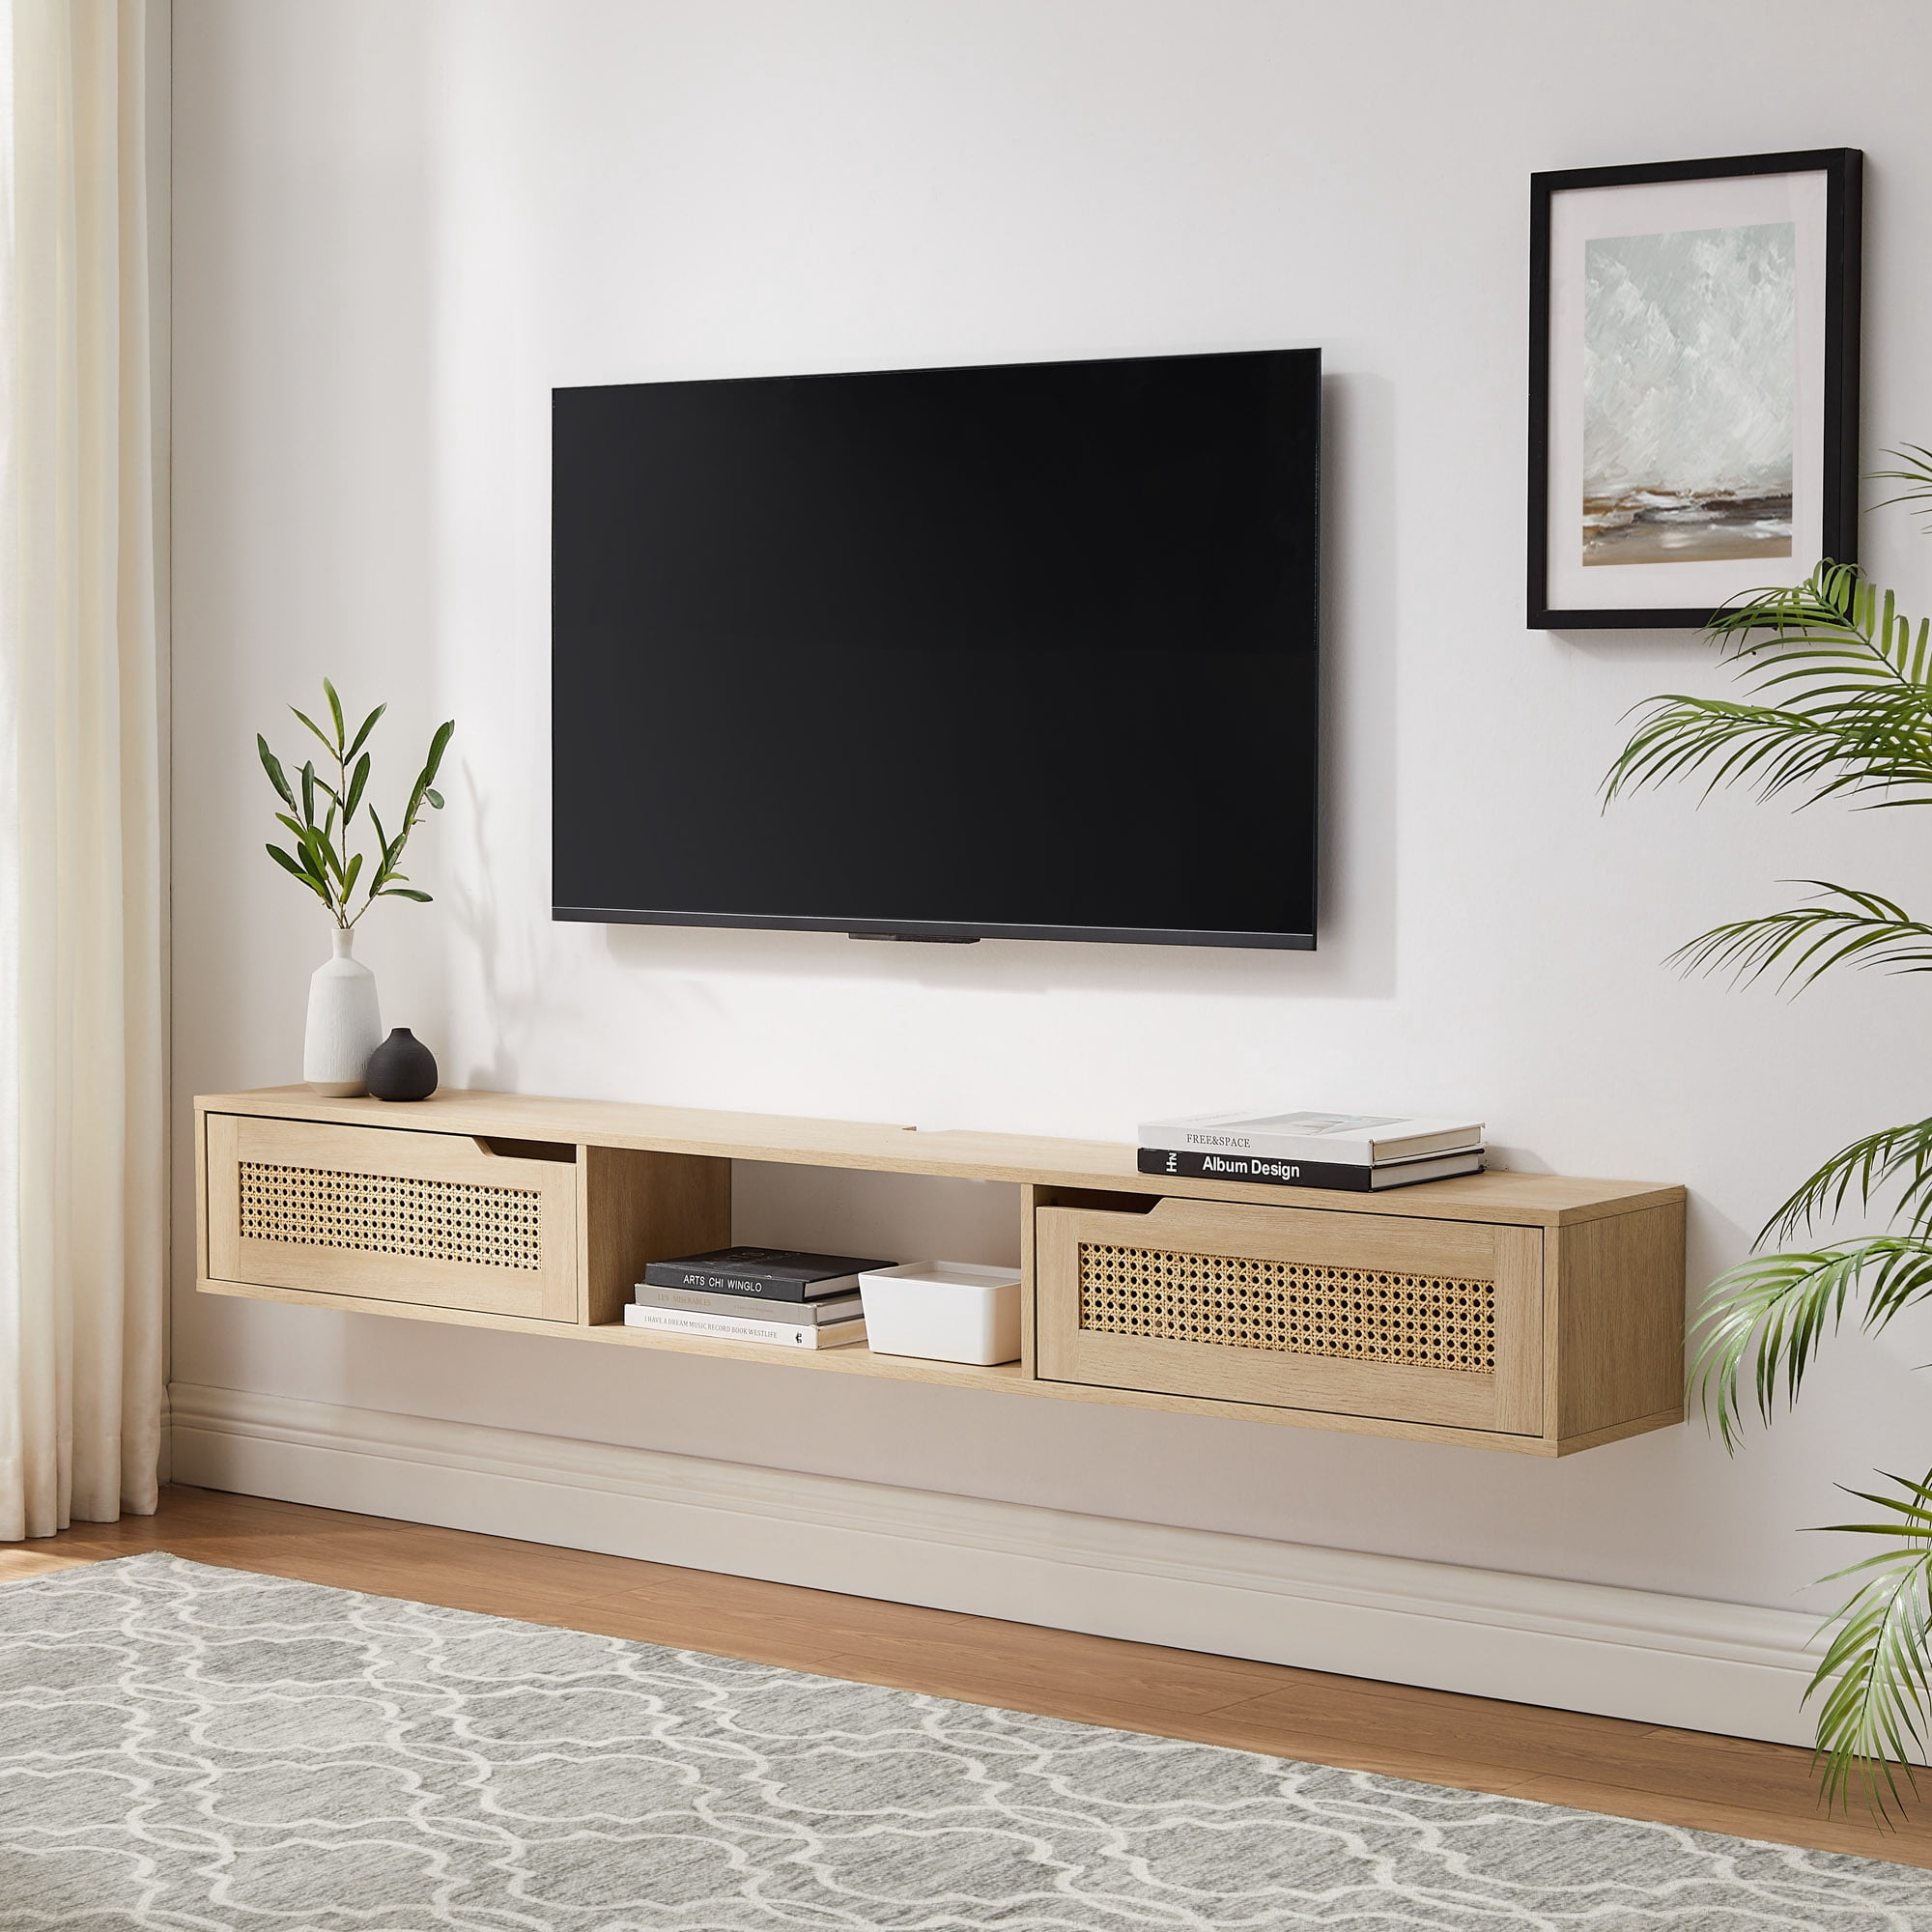 70" Manor Park Modern Rattan-Door Floating Wall Mounted TV Stand for TVs up to 80” (Coastal Oak or Black) $88.62 + Free Shipping